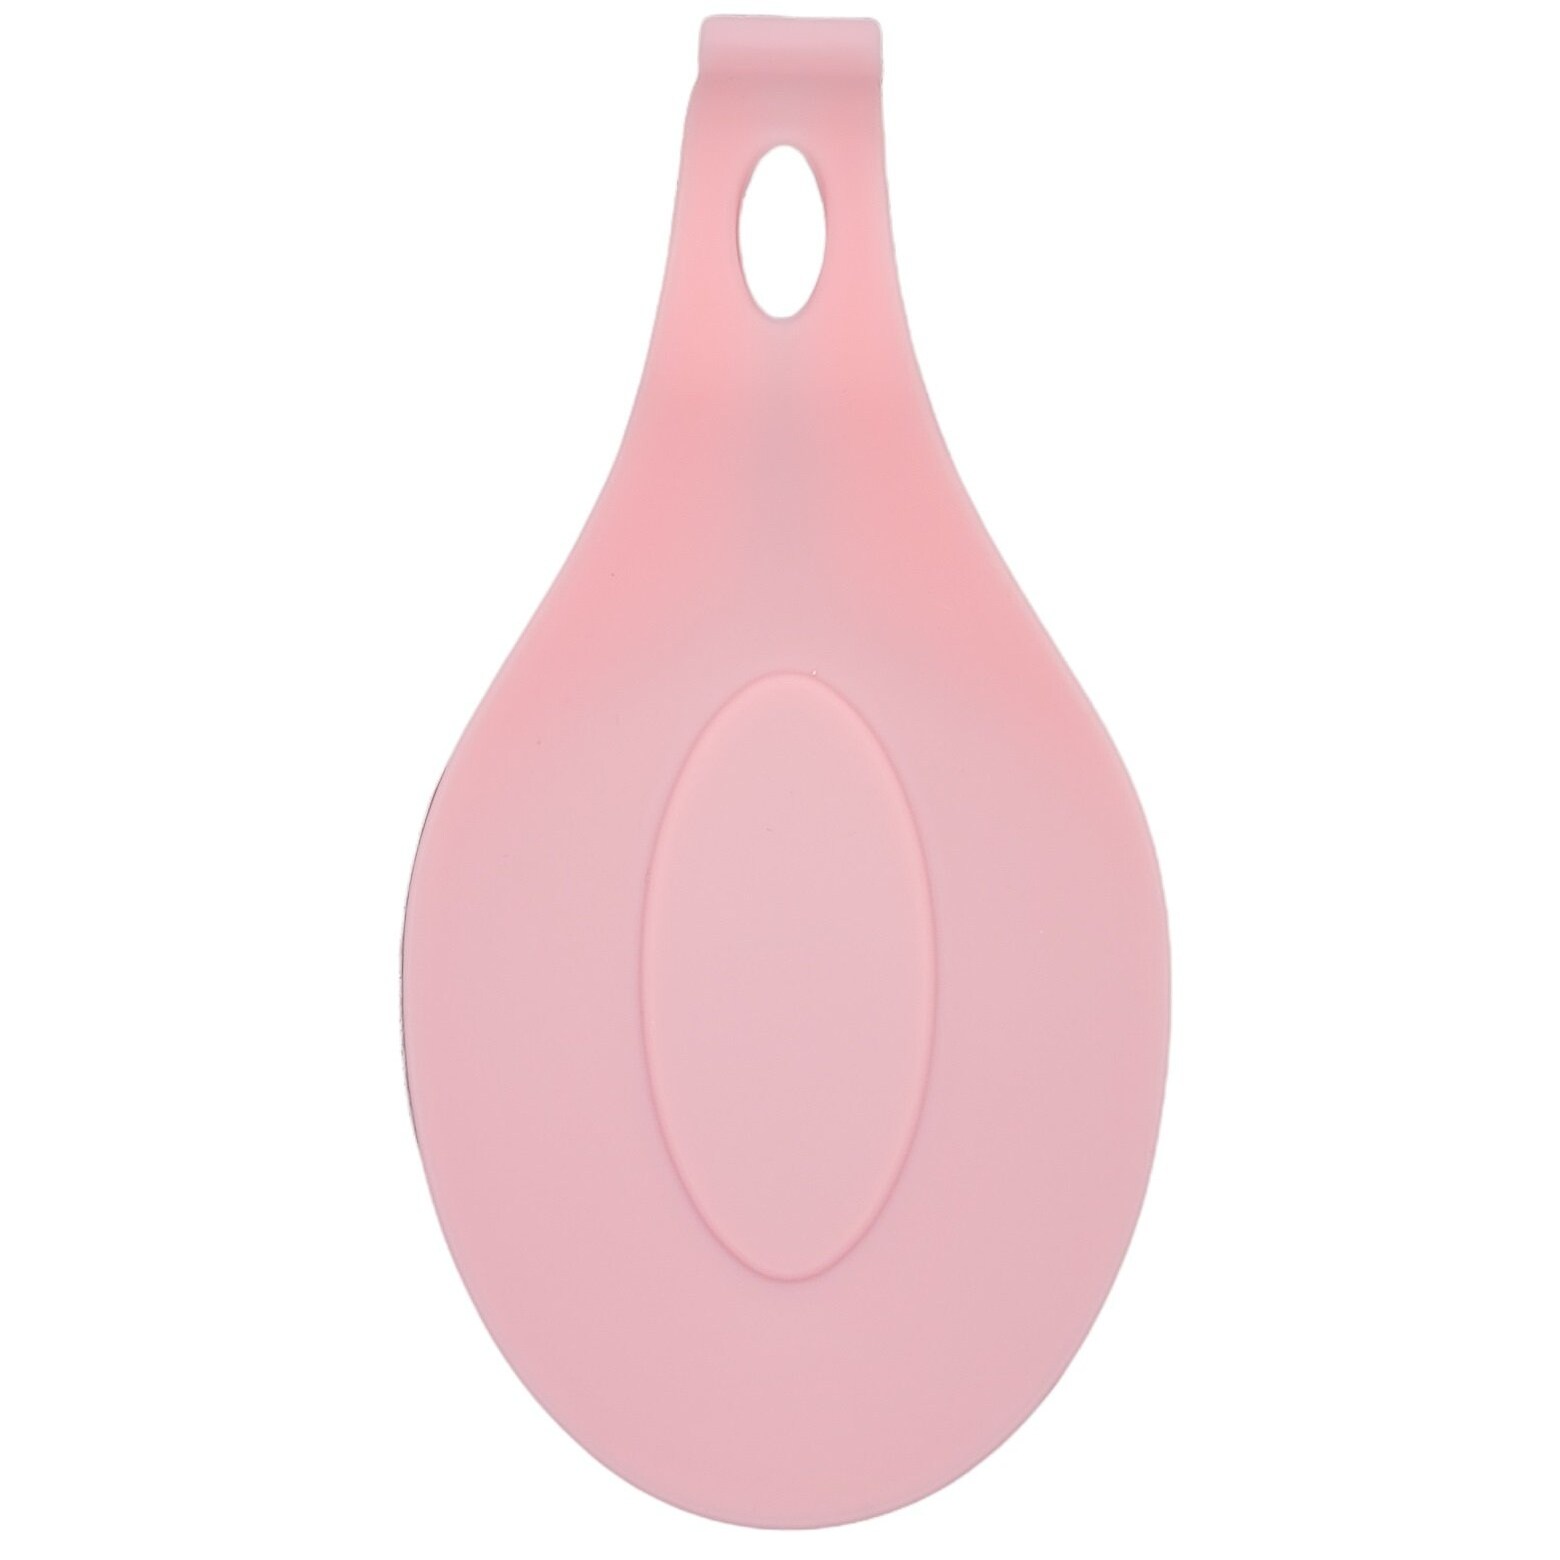 https://ak1.ostkcdn.com/images/products/is/images/direct/882524af61d7a3d1f0afdb6e77ffd0544911be04/Handy-Housewares-Jumbo-Flexible-Silicone-Spoon-Rest%2C-Heat-Resistant-Stove-Top-Kitchen-Utensil-Drip-Pad.jpg